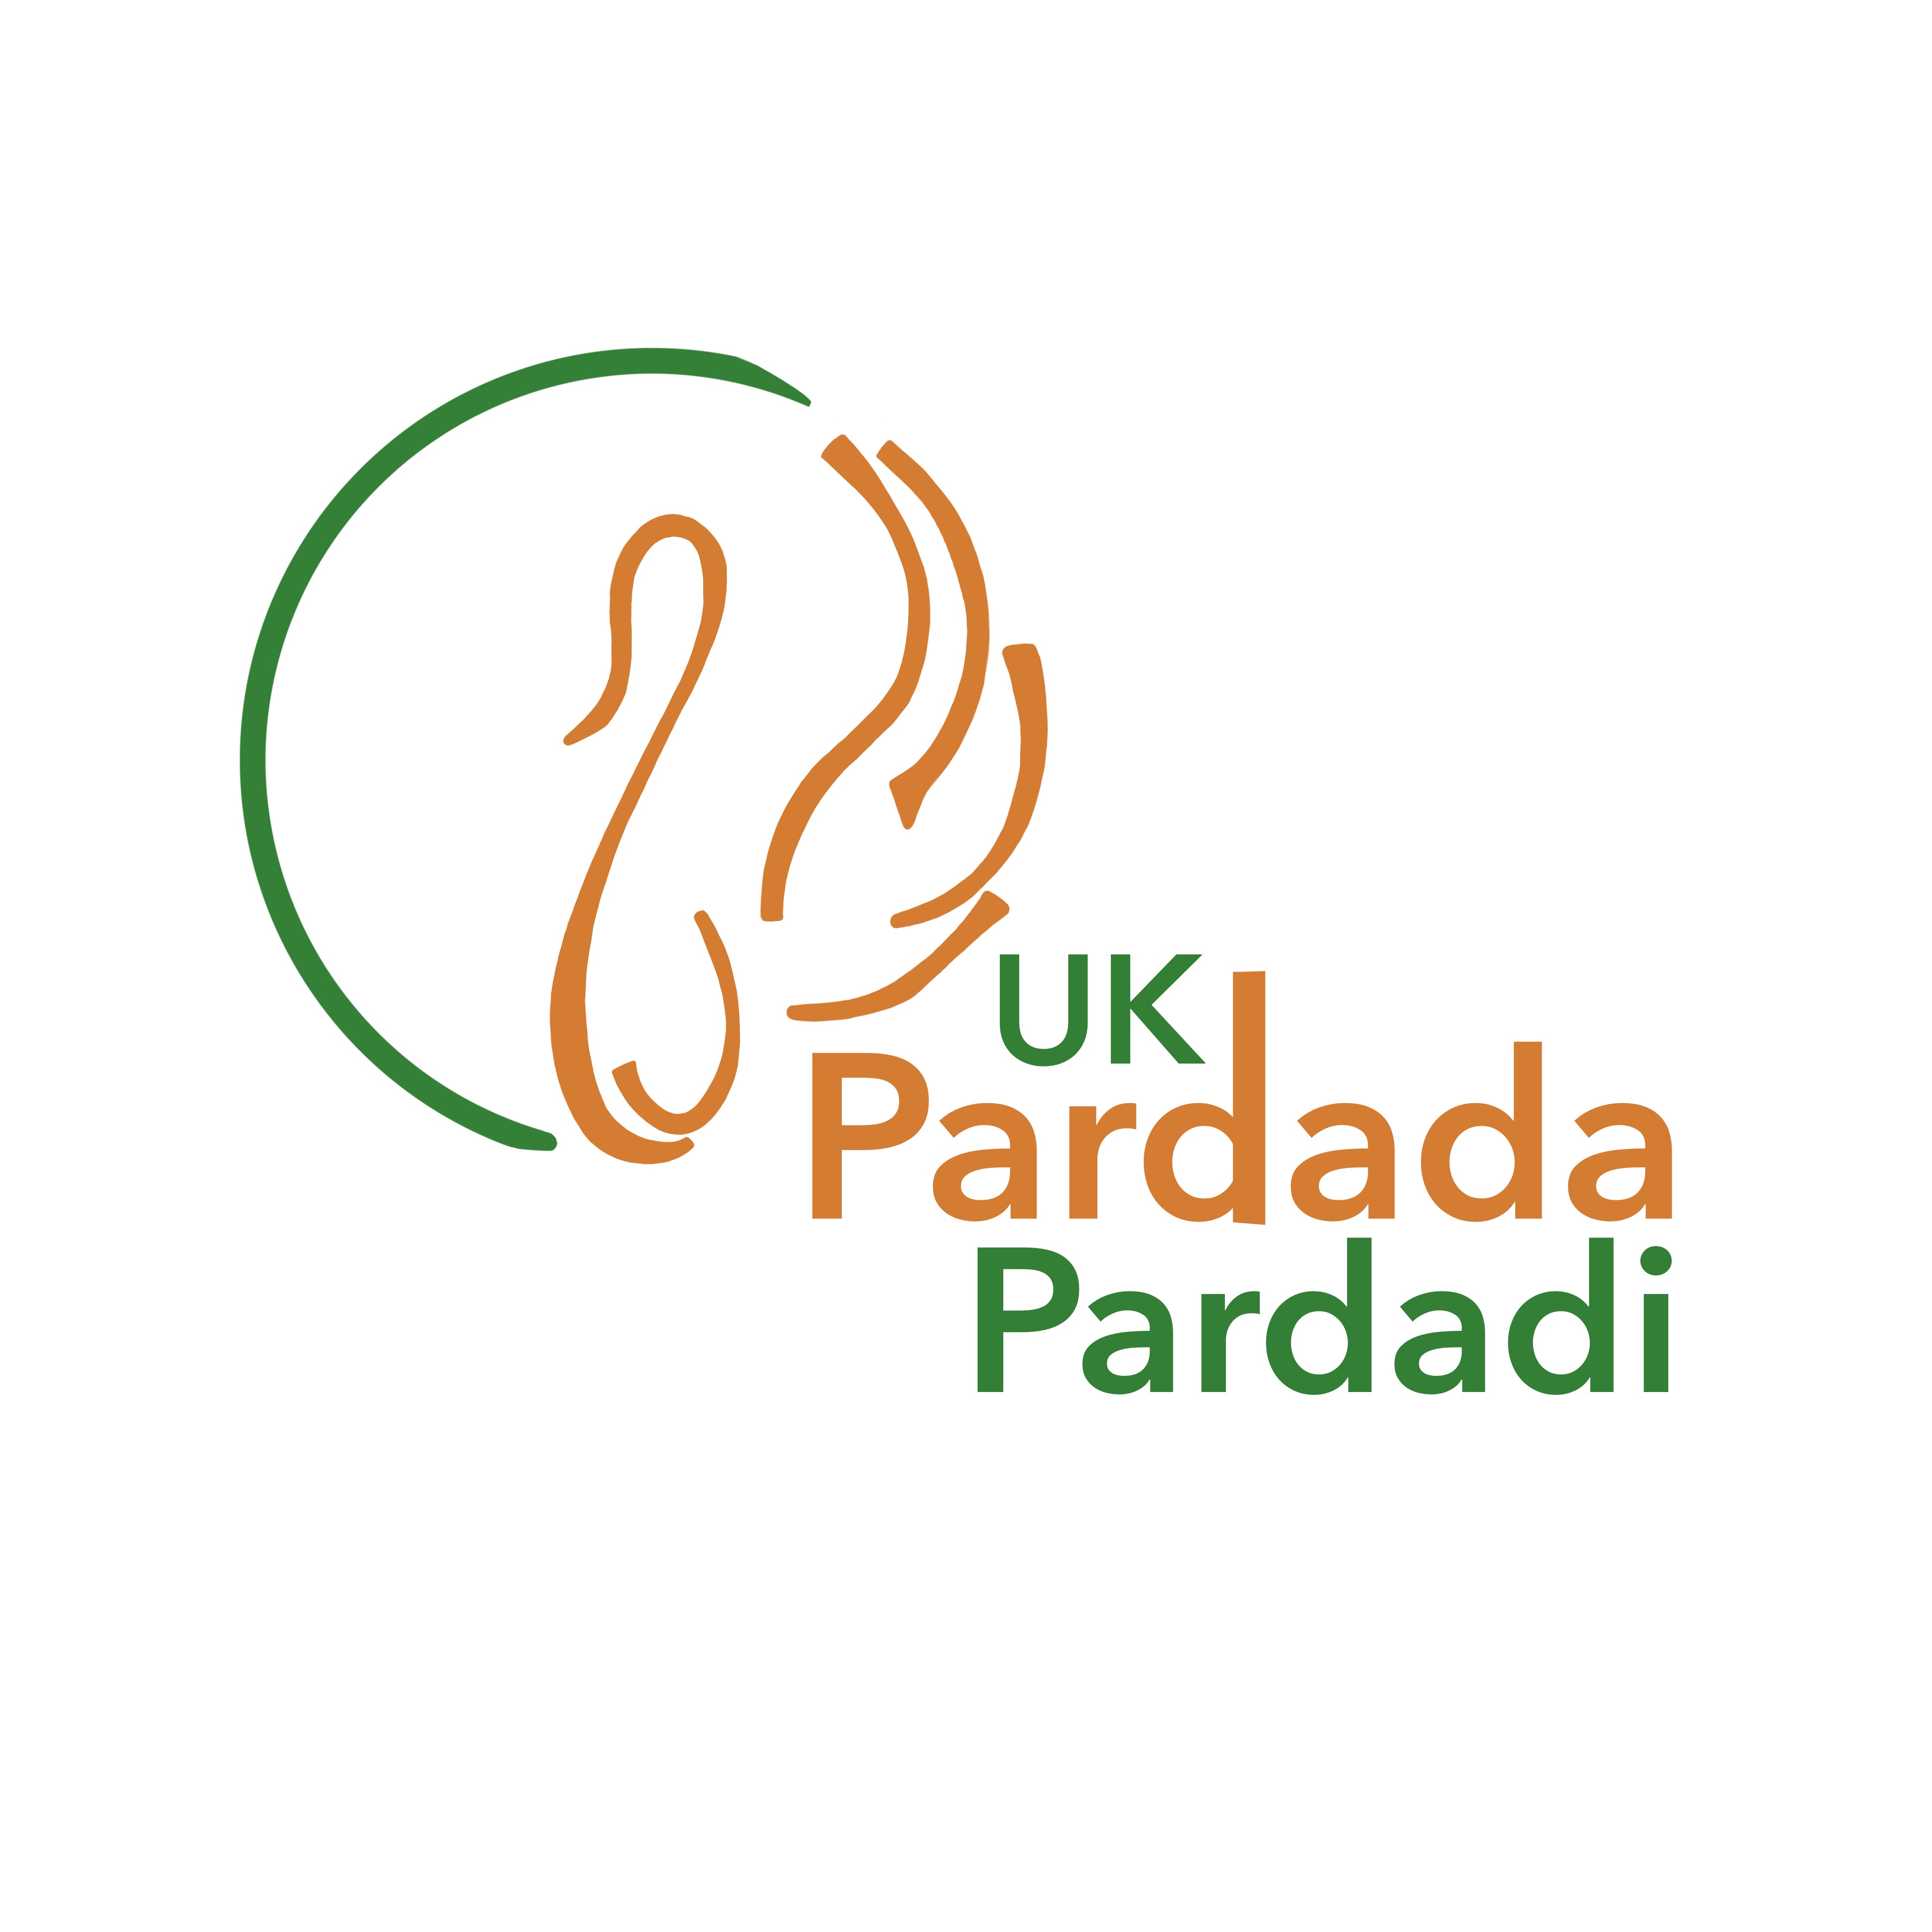 Tickets for Pardada Pardadi Educational Society's Annual Fundraiser lunch on 22nd May 2022